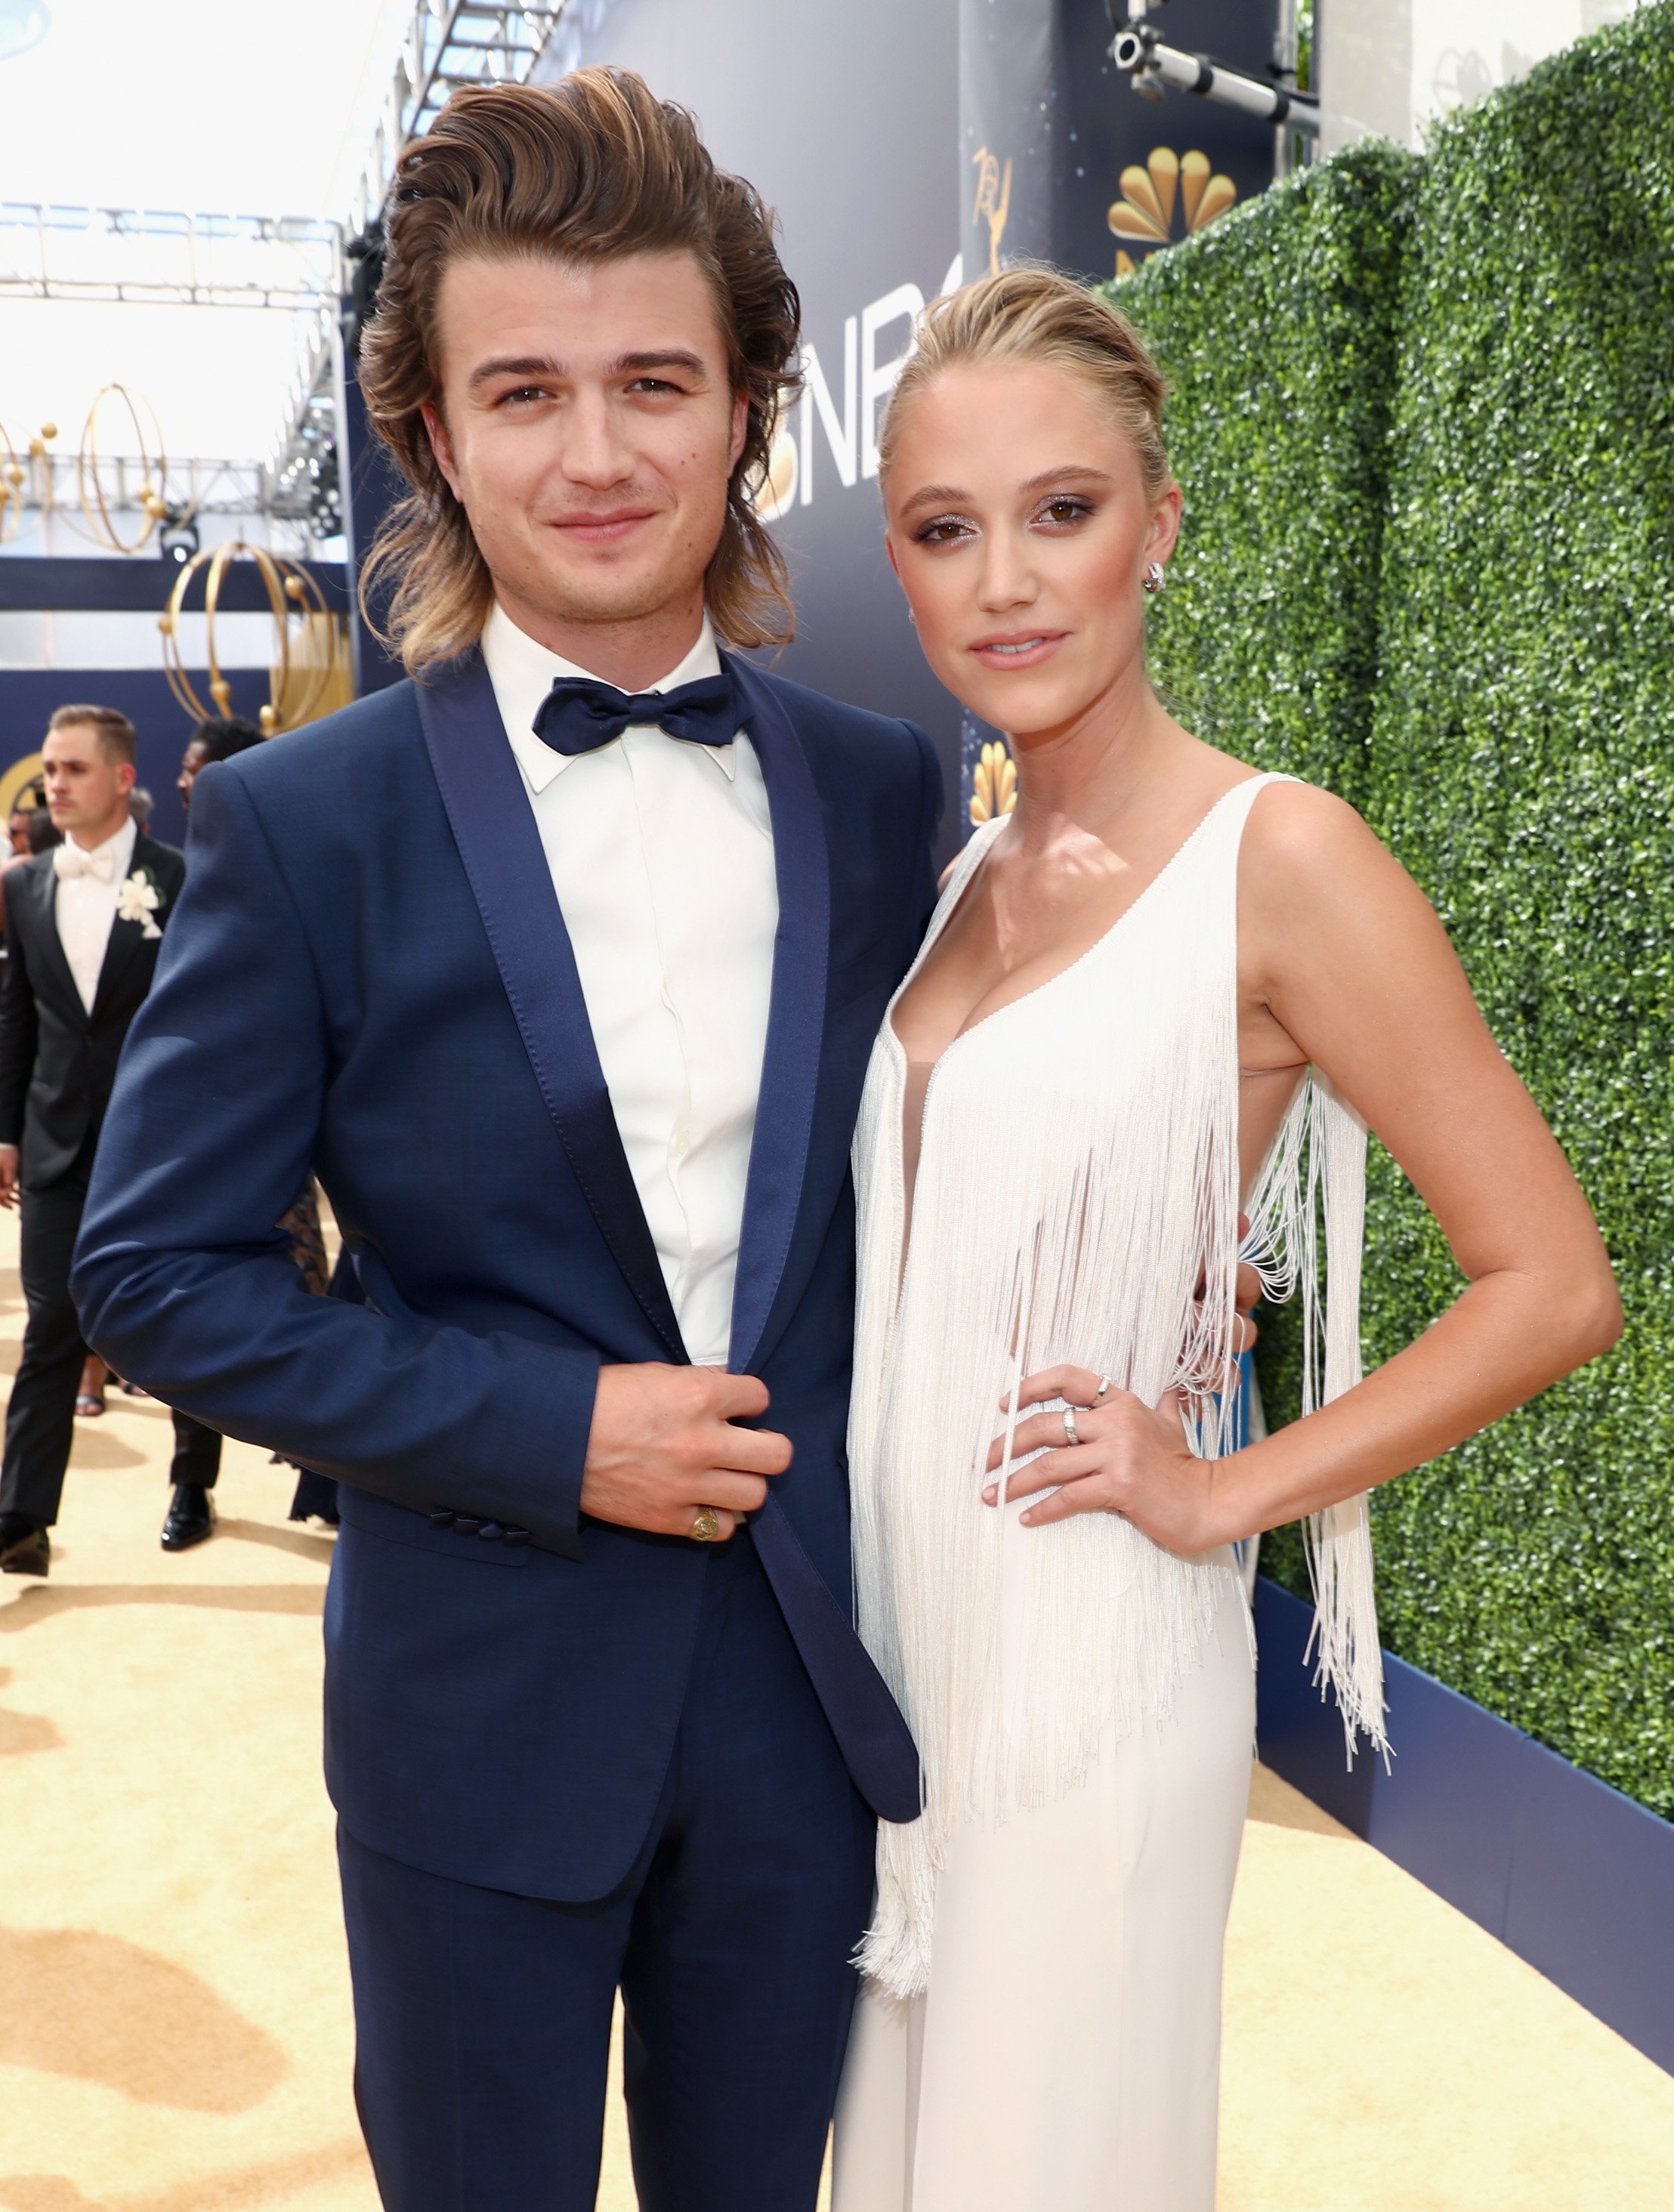 Joe Keery and Maika Monroe attend the 70th Annual Primetime Emmy Awards at Microsoft Theater on September 17, 2018, in Los Angeles, California. | Source: Getty Images